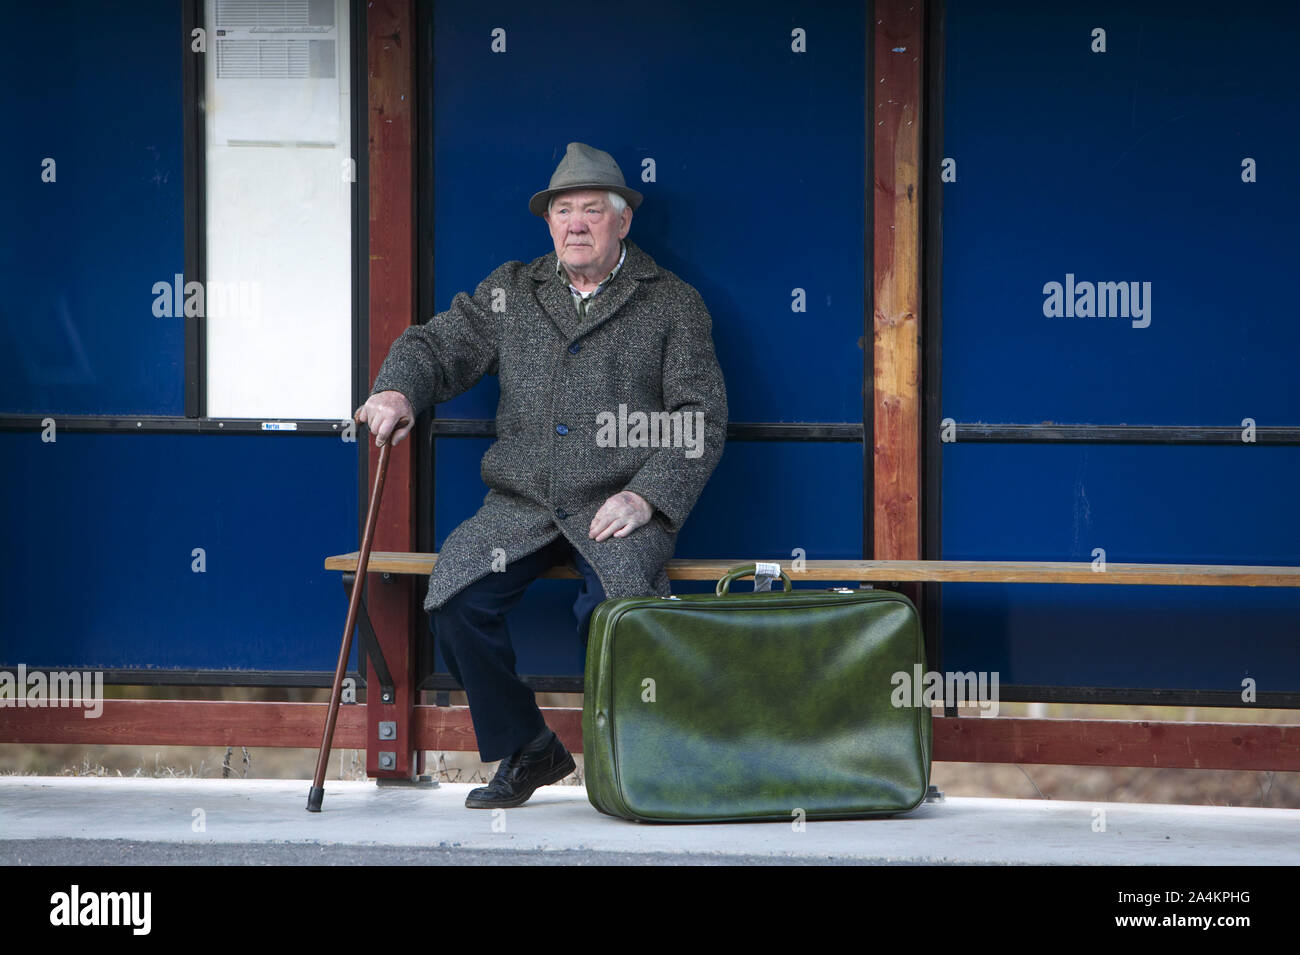 [Image: old-man-waiting-on-a-bus-stop-old-age-pa...A4KPHG.jpg]